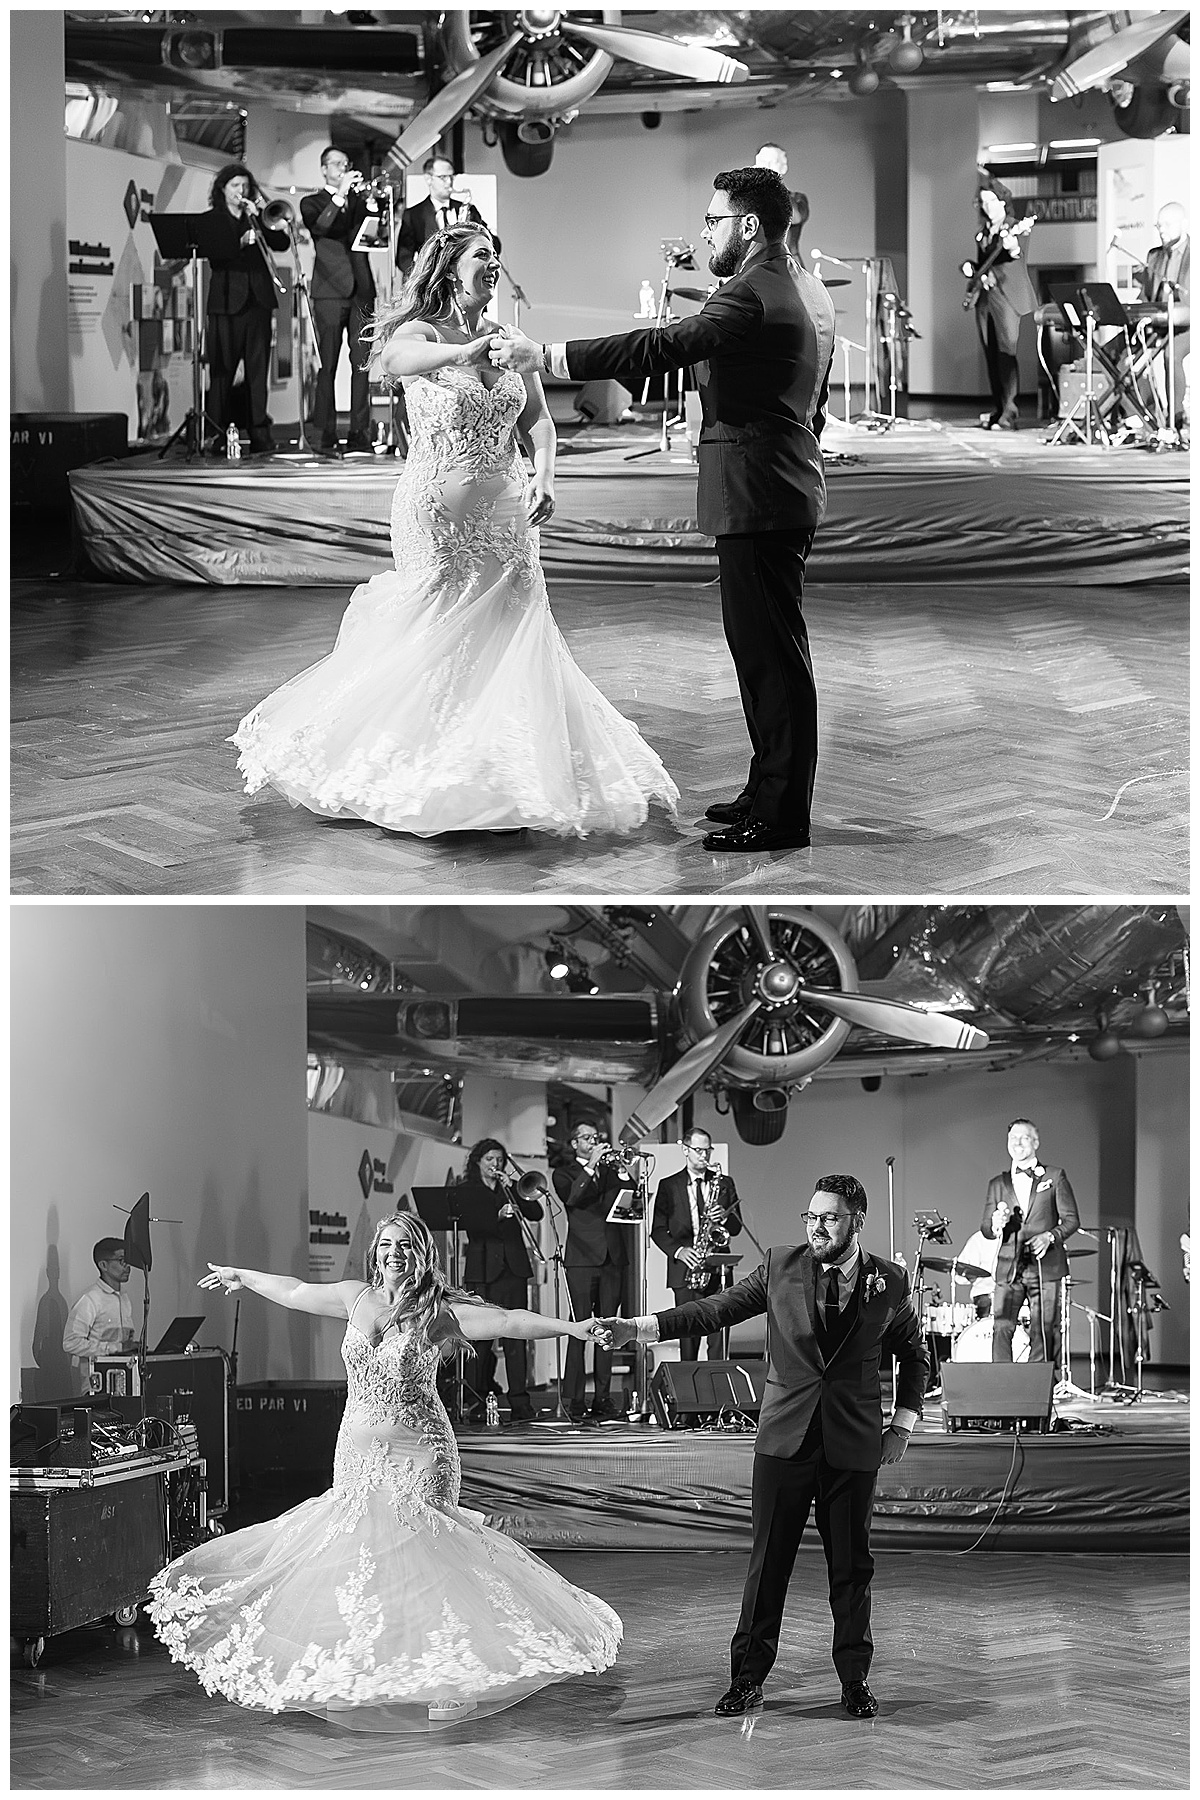 Husband and wife dance together at The Henry Ford Museum